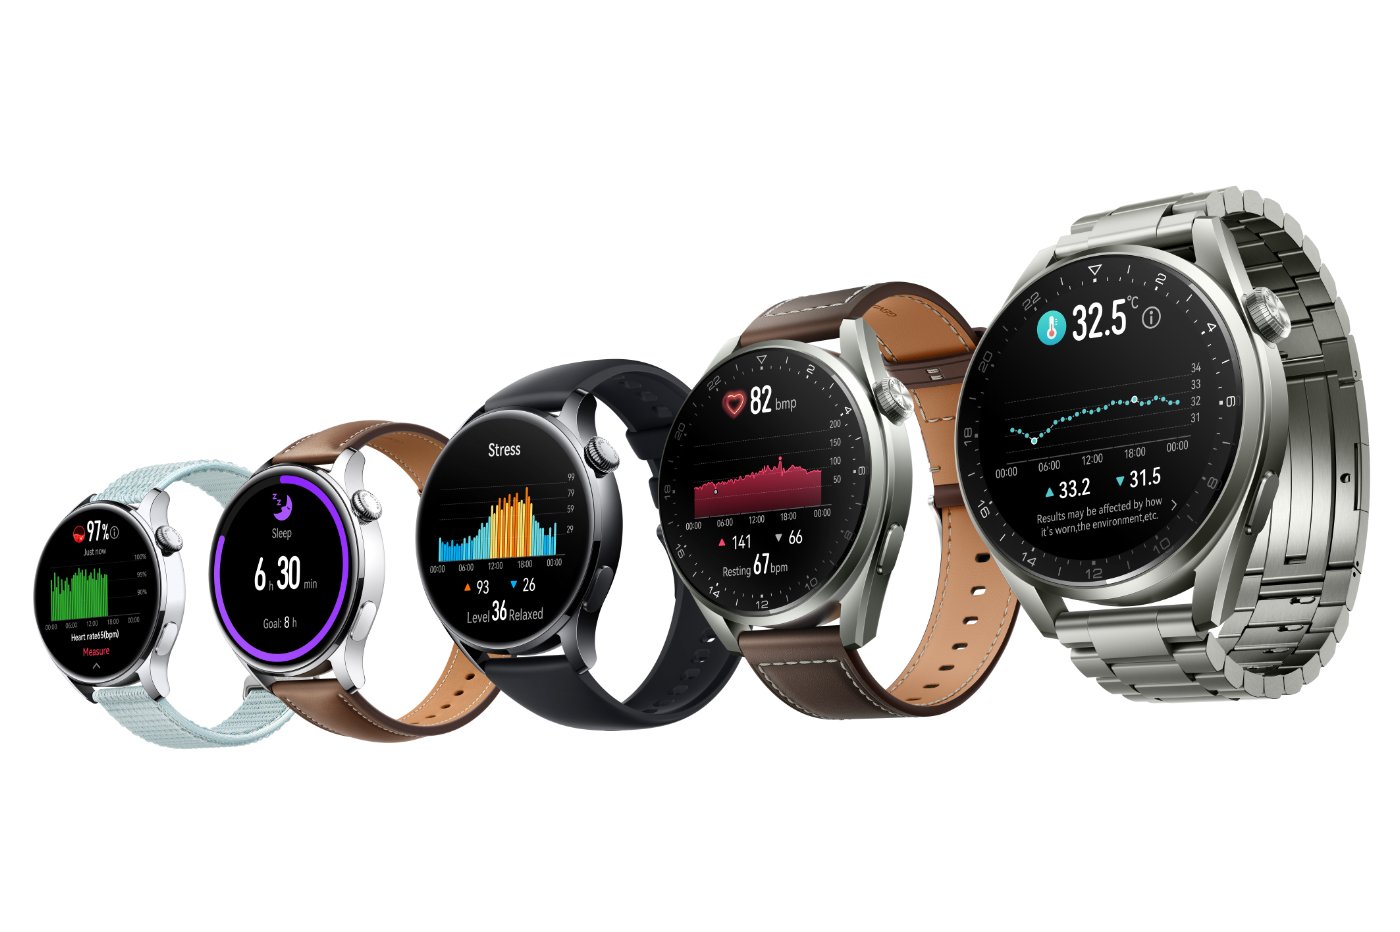 Huawei Watch 3 and Watch 3 Pro feature difference between Android and iOS -  Huawei Central